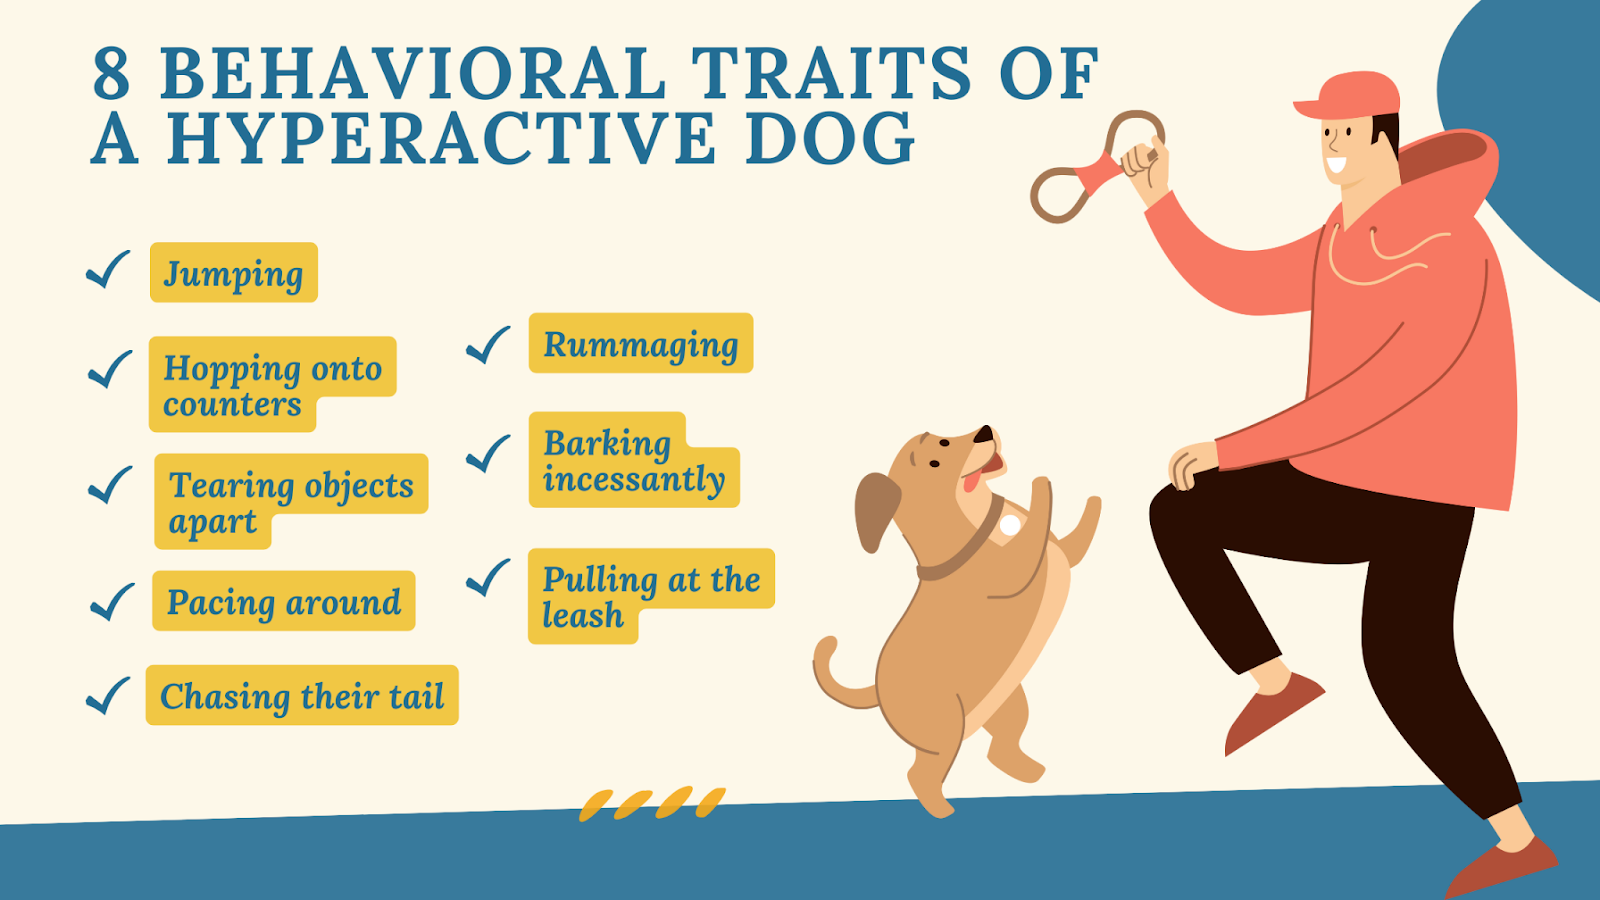 Behavioral traits of a hyperactive dog